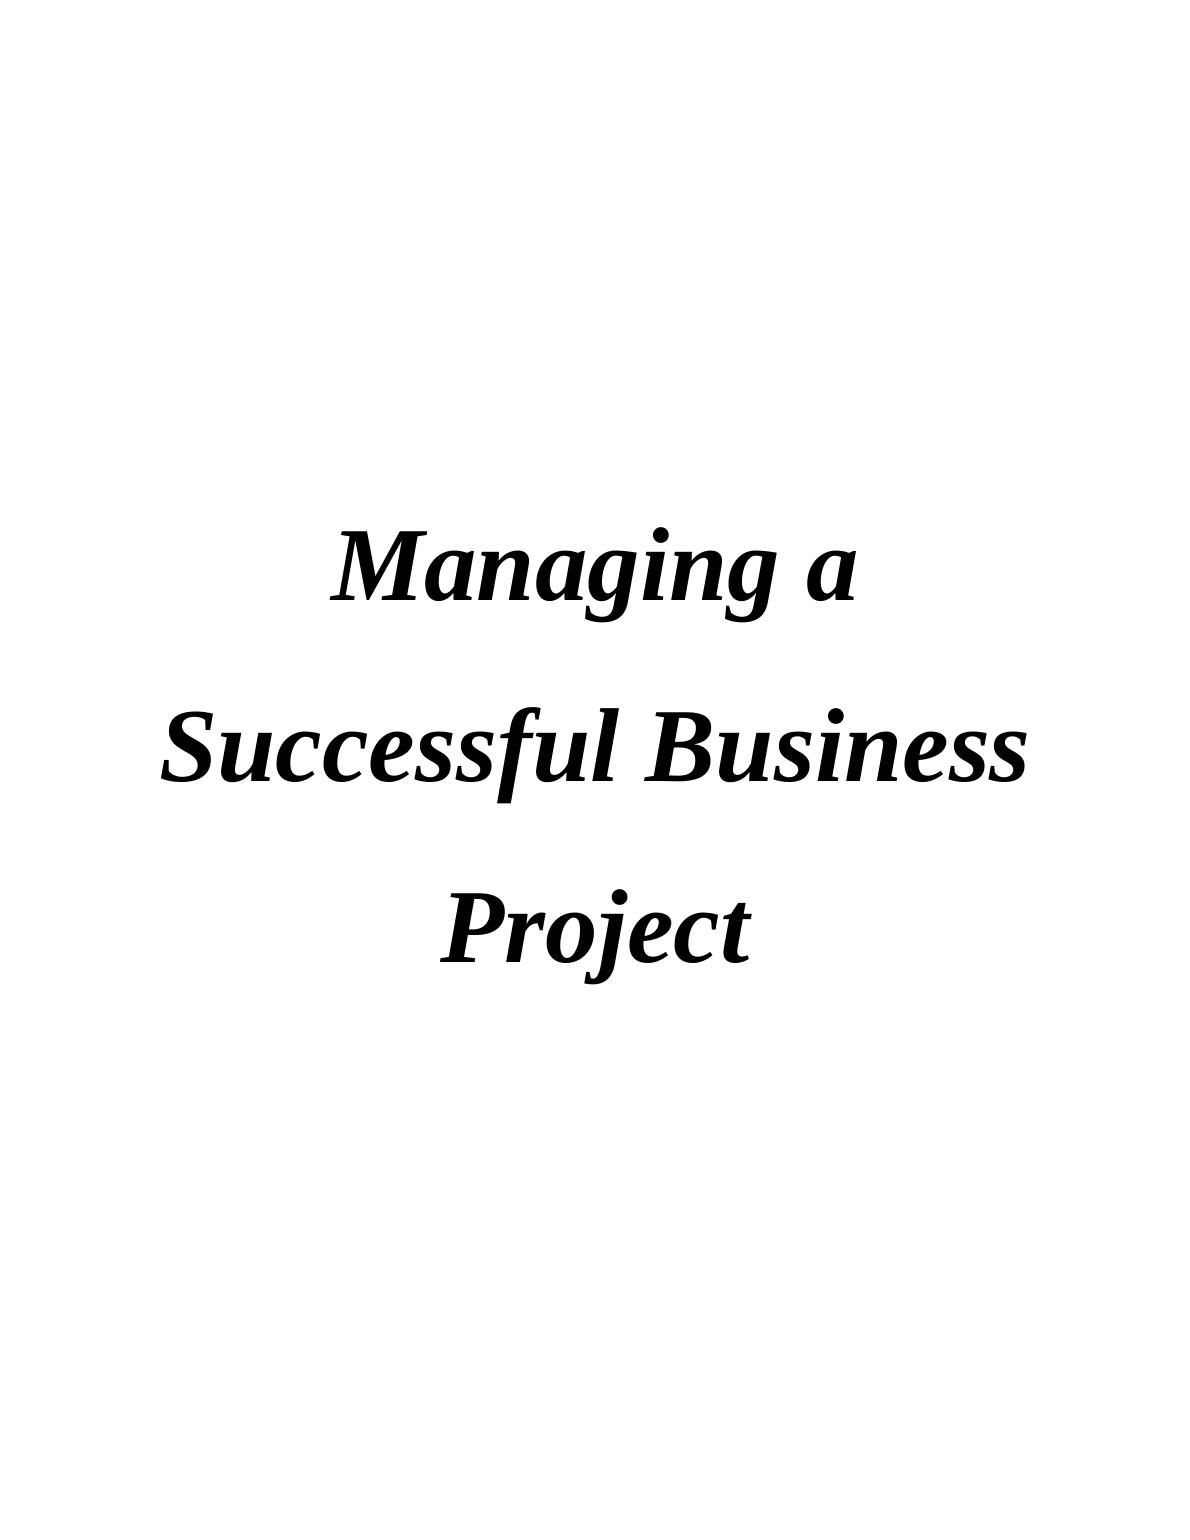 Managing a Successful Business Project : McDonald's_1